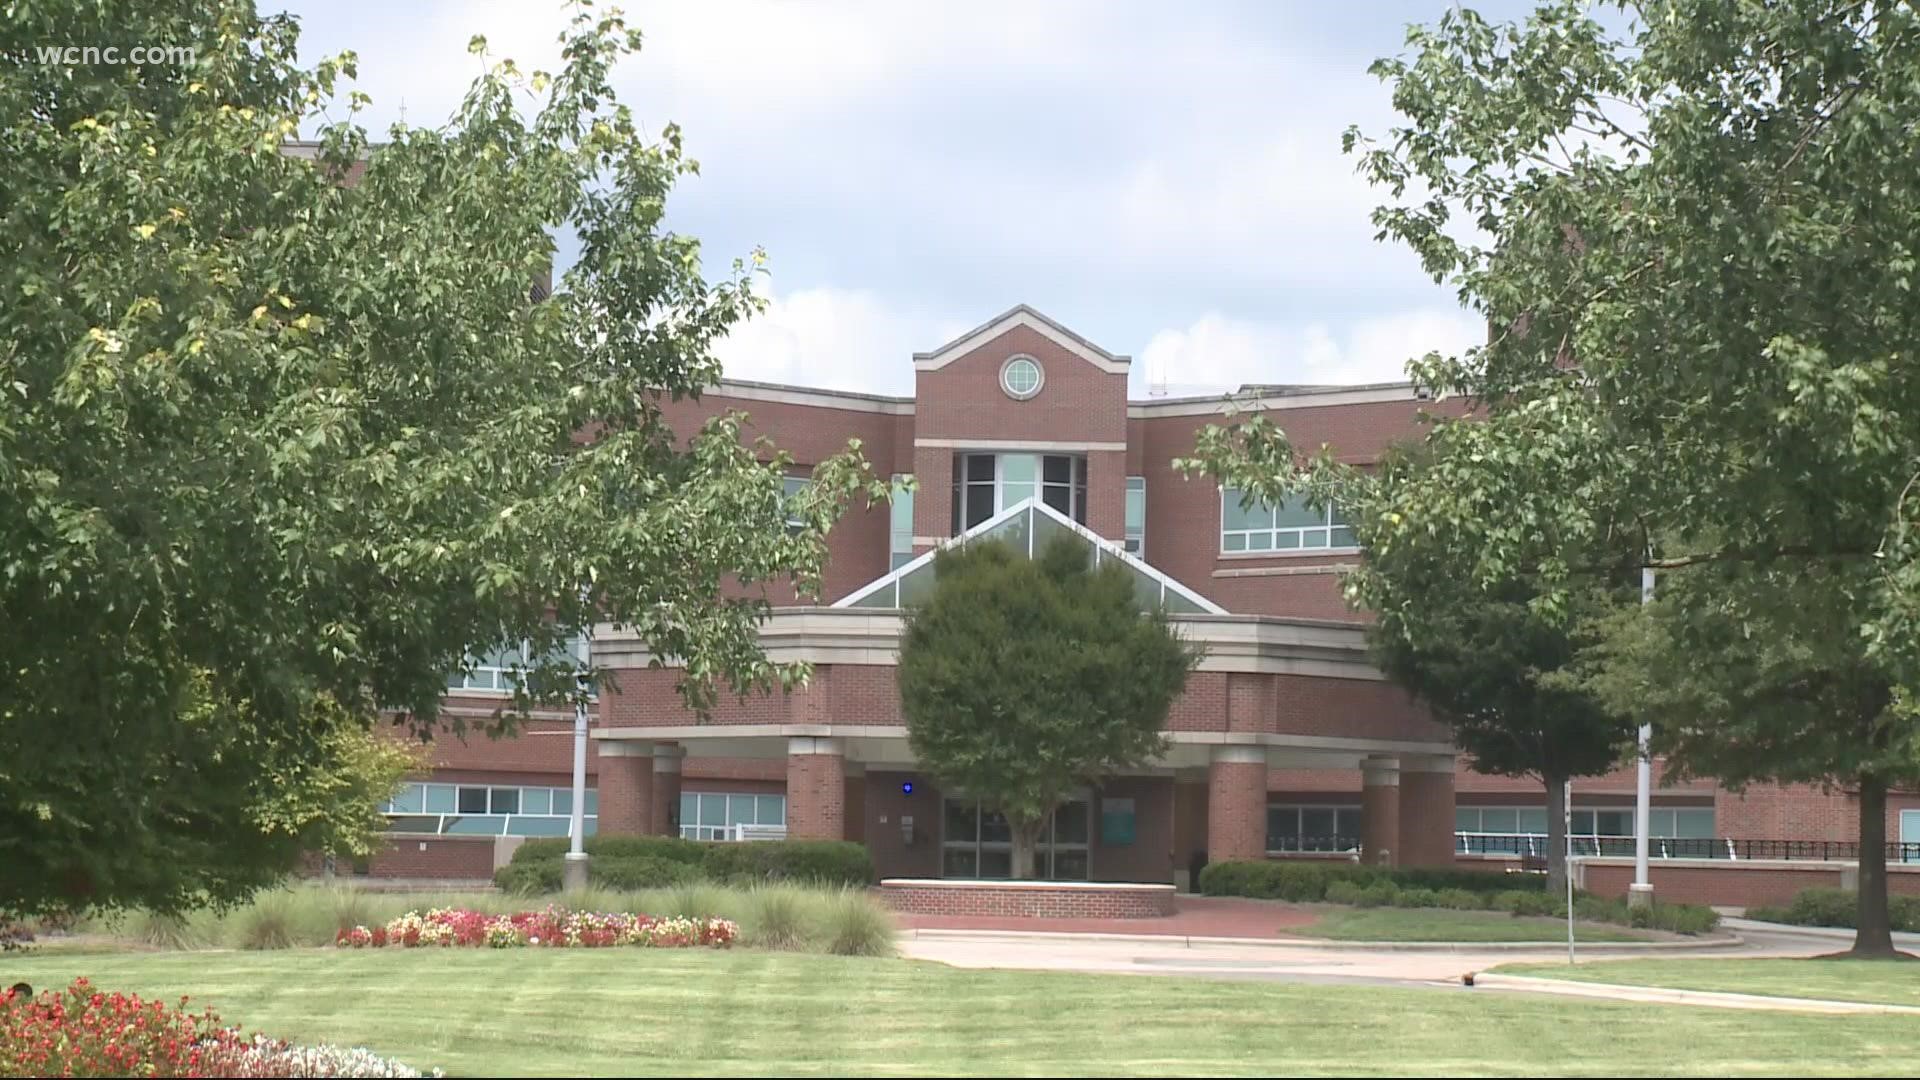 The Health Director said a Cabarrus County hospital has seen an 800% increase in cases since June.